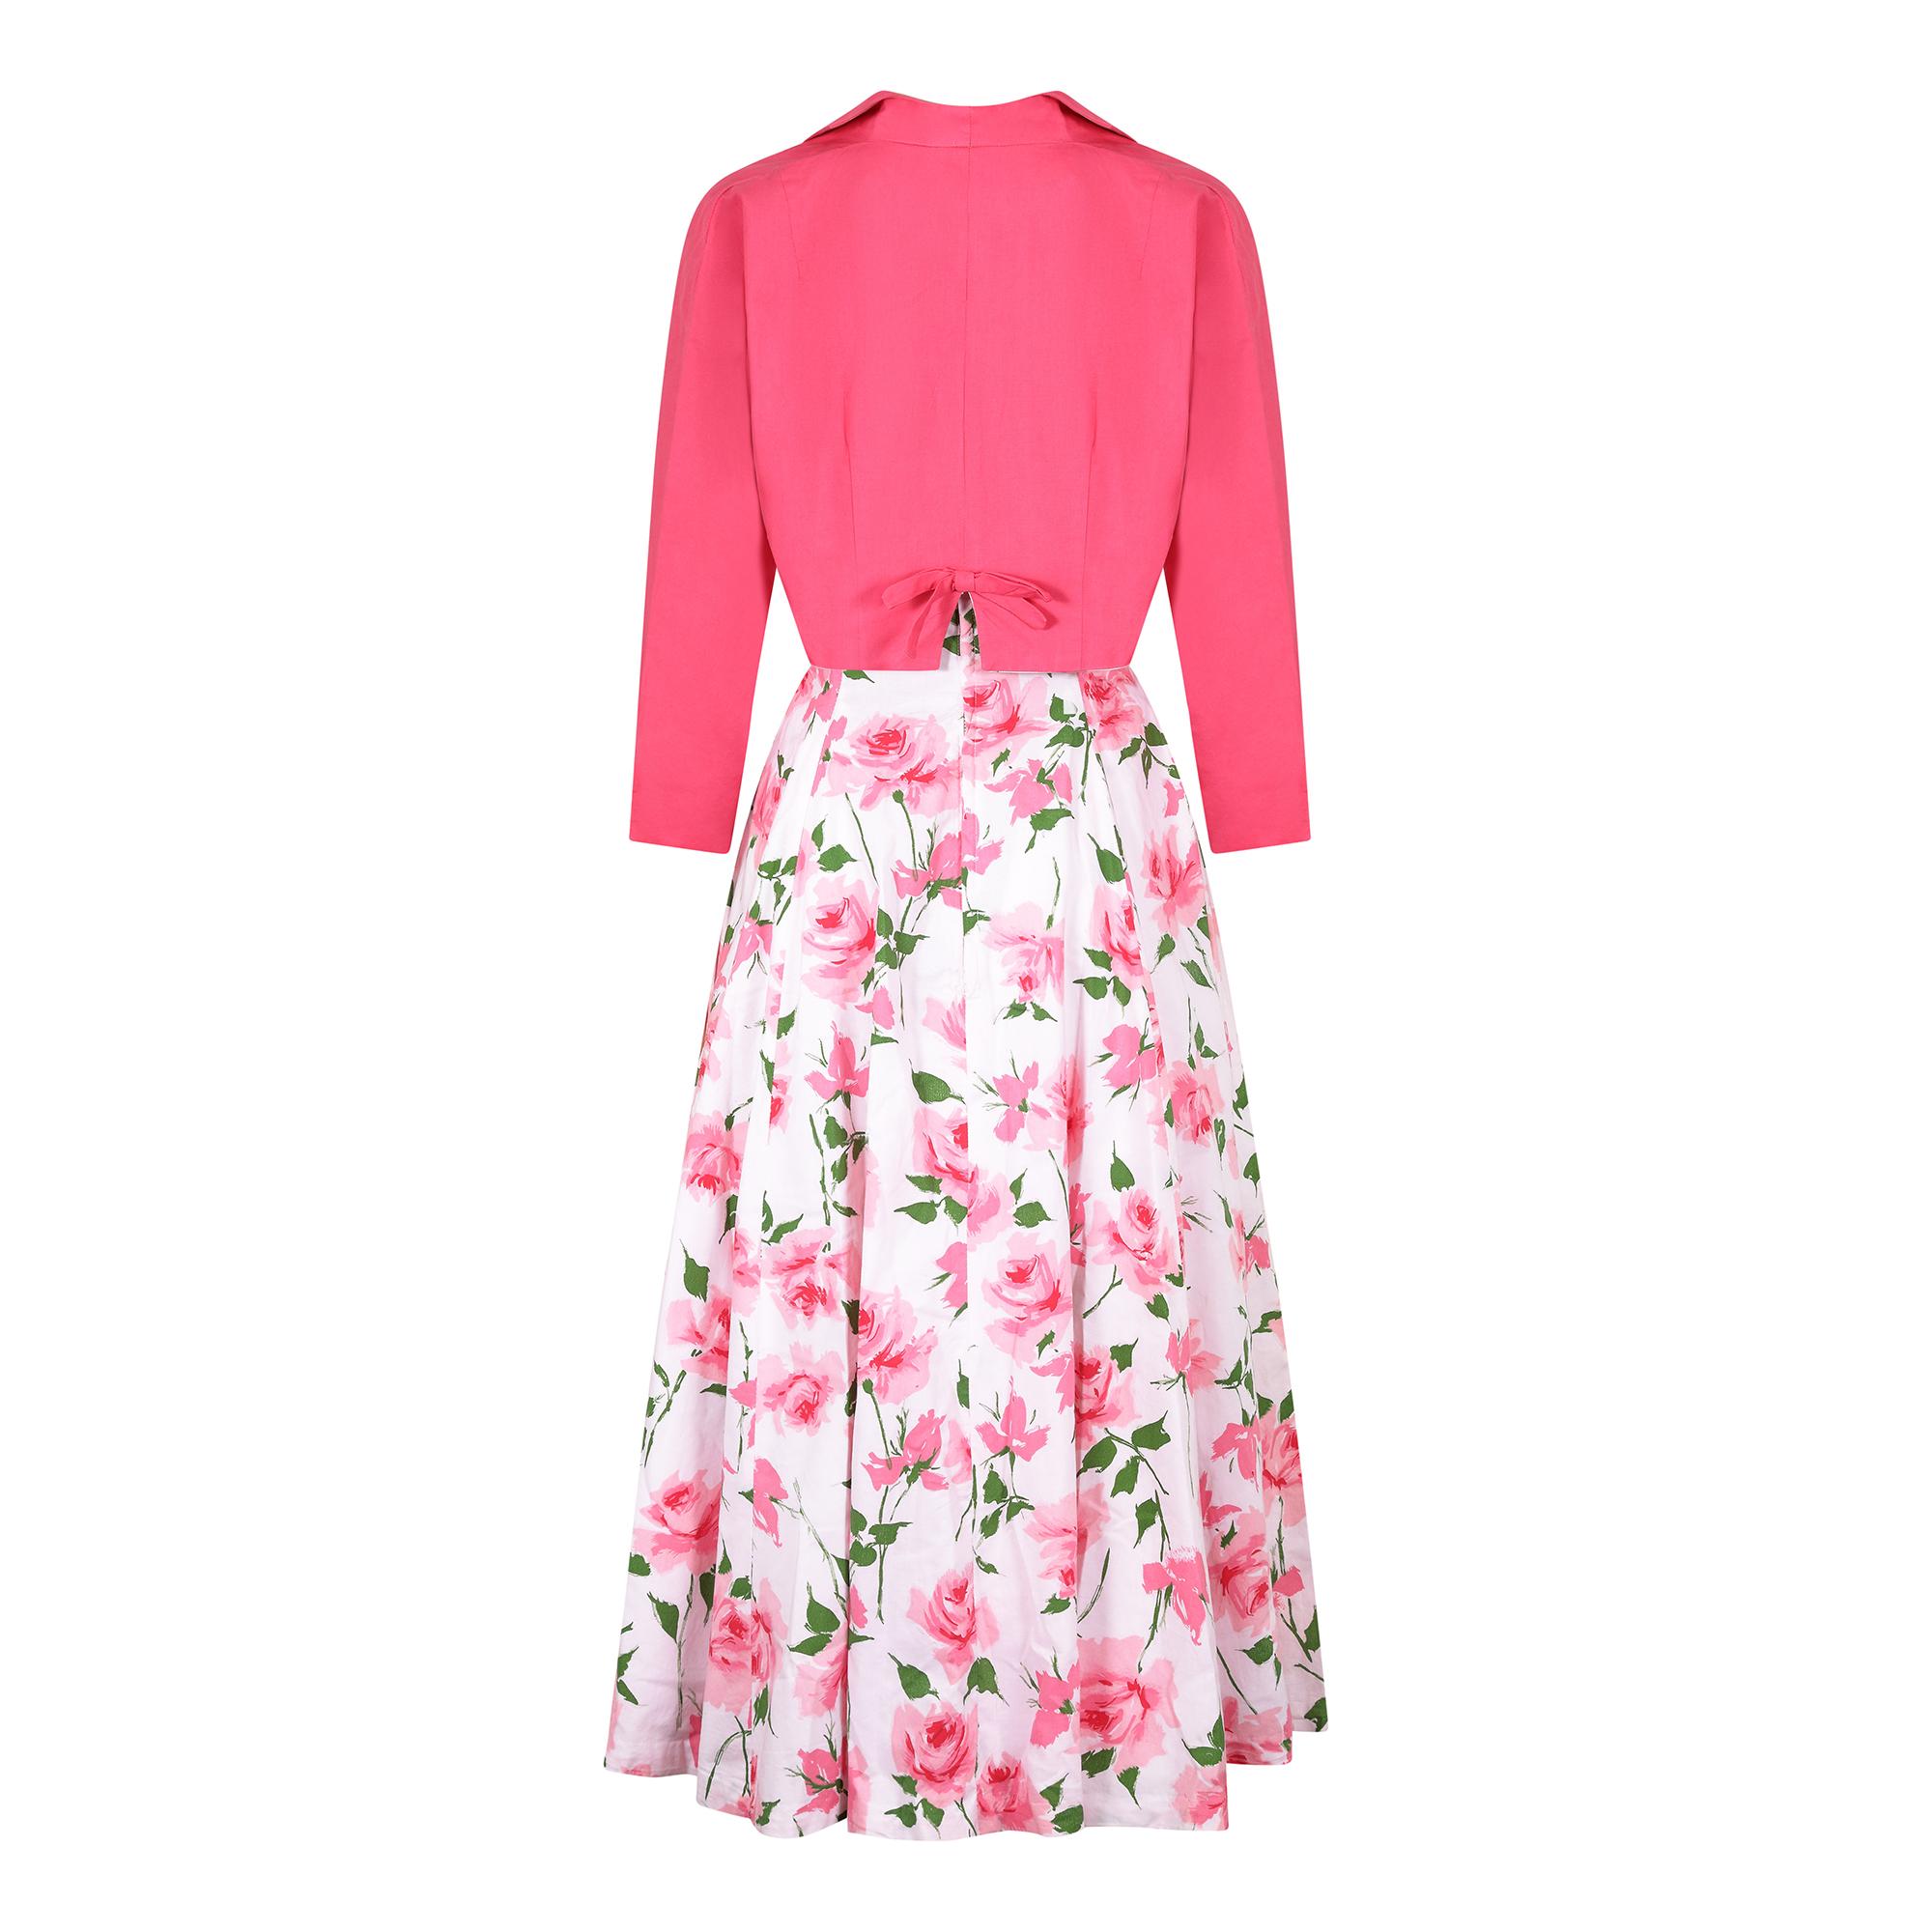 This is the best rose print dress ensemble we've had in for some time and it is by British heritage brand California Cottons whose quality production values and desirable prints easily rivalled Horrockses fashions. The rose print is spectacular; in